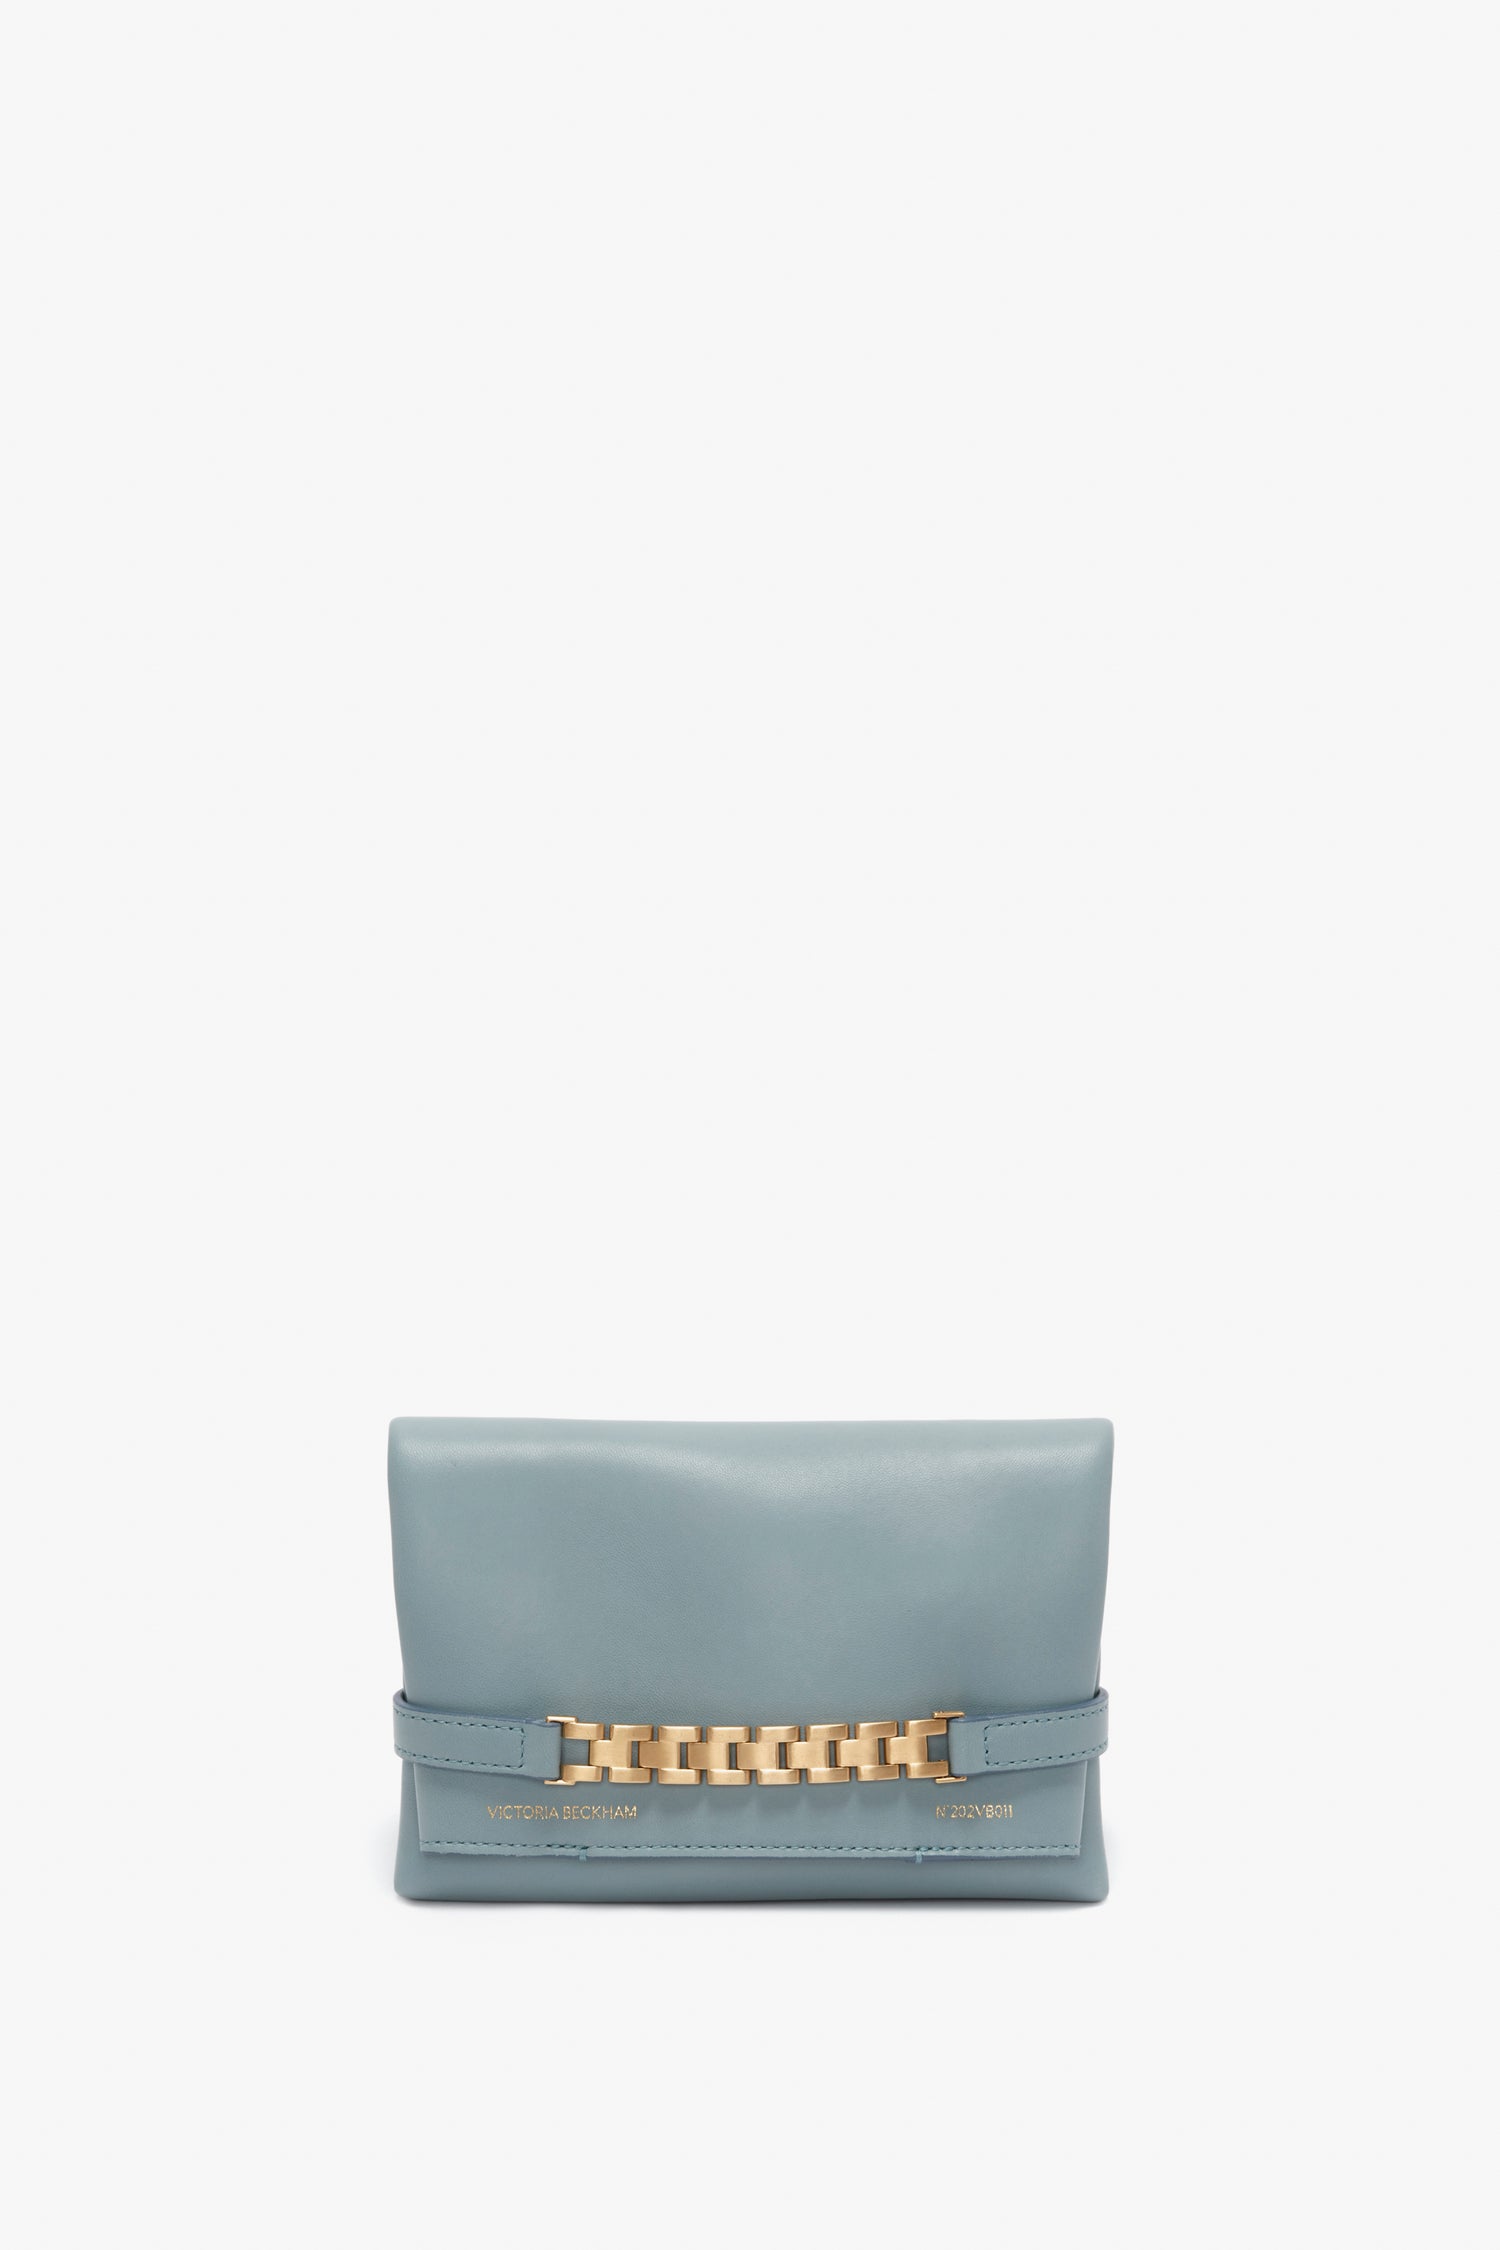 A soft-blue leather Mini Chain Pouch Bag With Long Strap In Ice Leather with a gold-tone chain detail and "Victoria Beckham" embossed on the front.